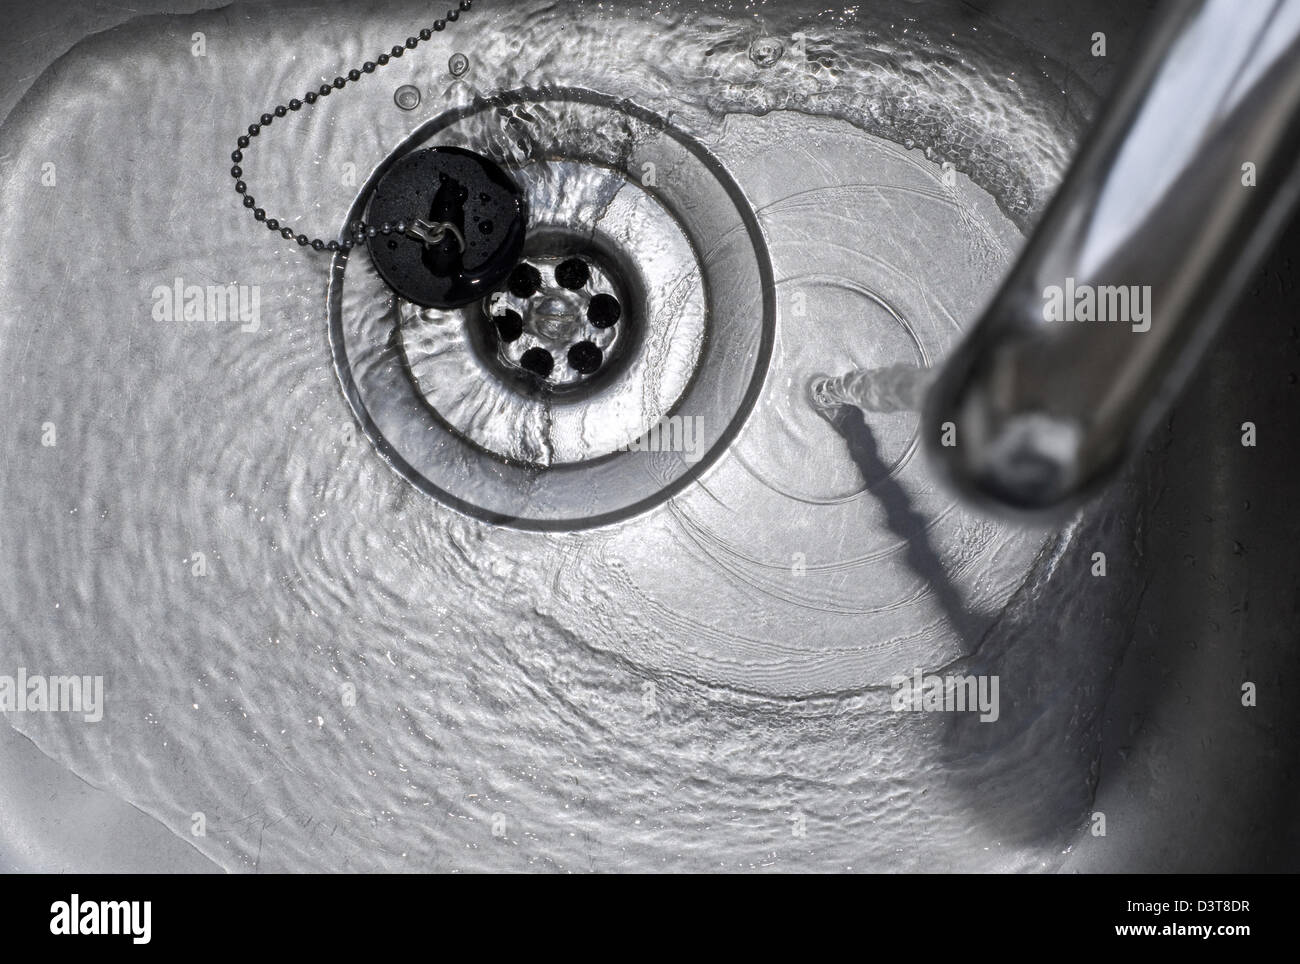 Water Running Down the Plughole in a stainless steel kitchen sink Stock Photo